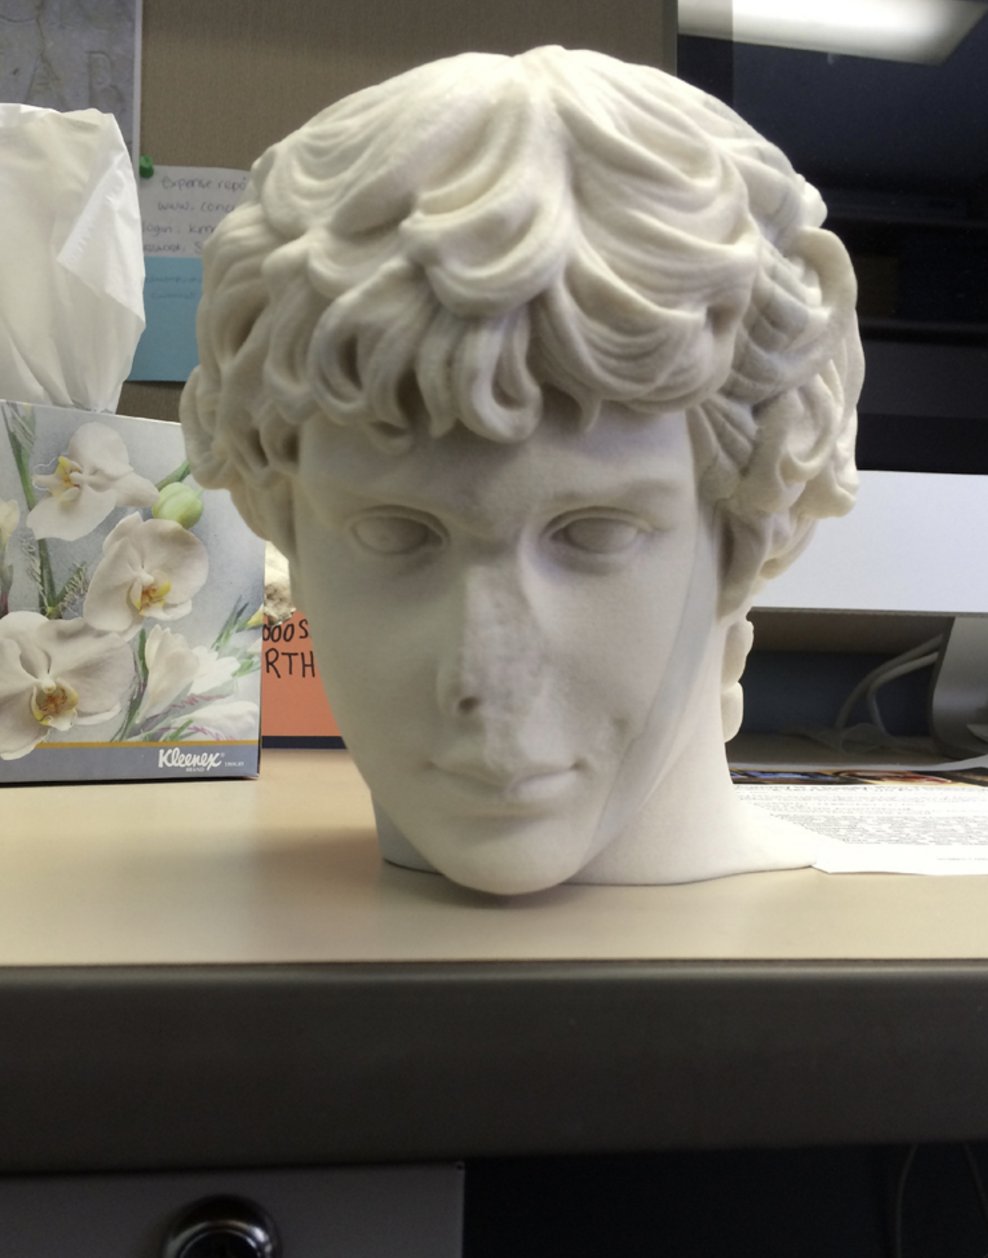 A 3D printed full-scale model shows the complete integration of the head of the Bust of Antinous